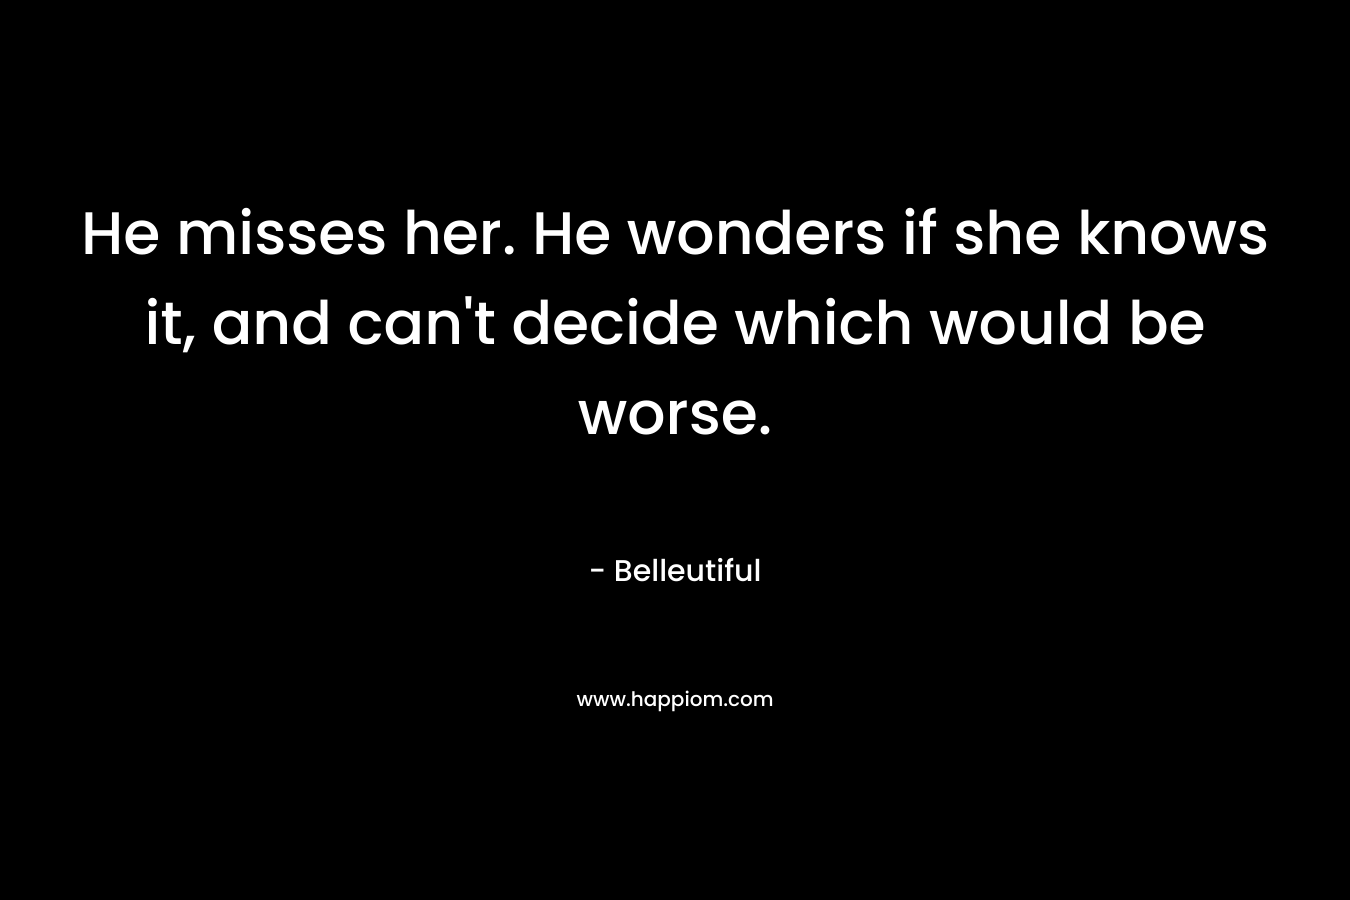 He misses her. He wonders if she knows it, and can’t decide which would be worse. – Belleutiful